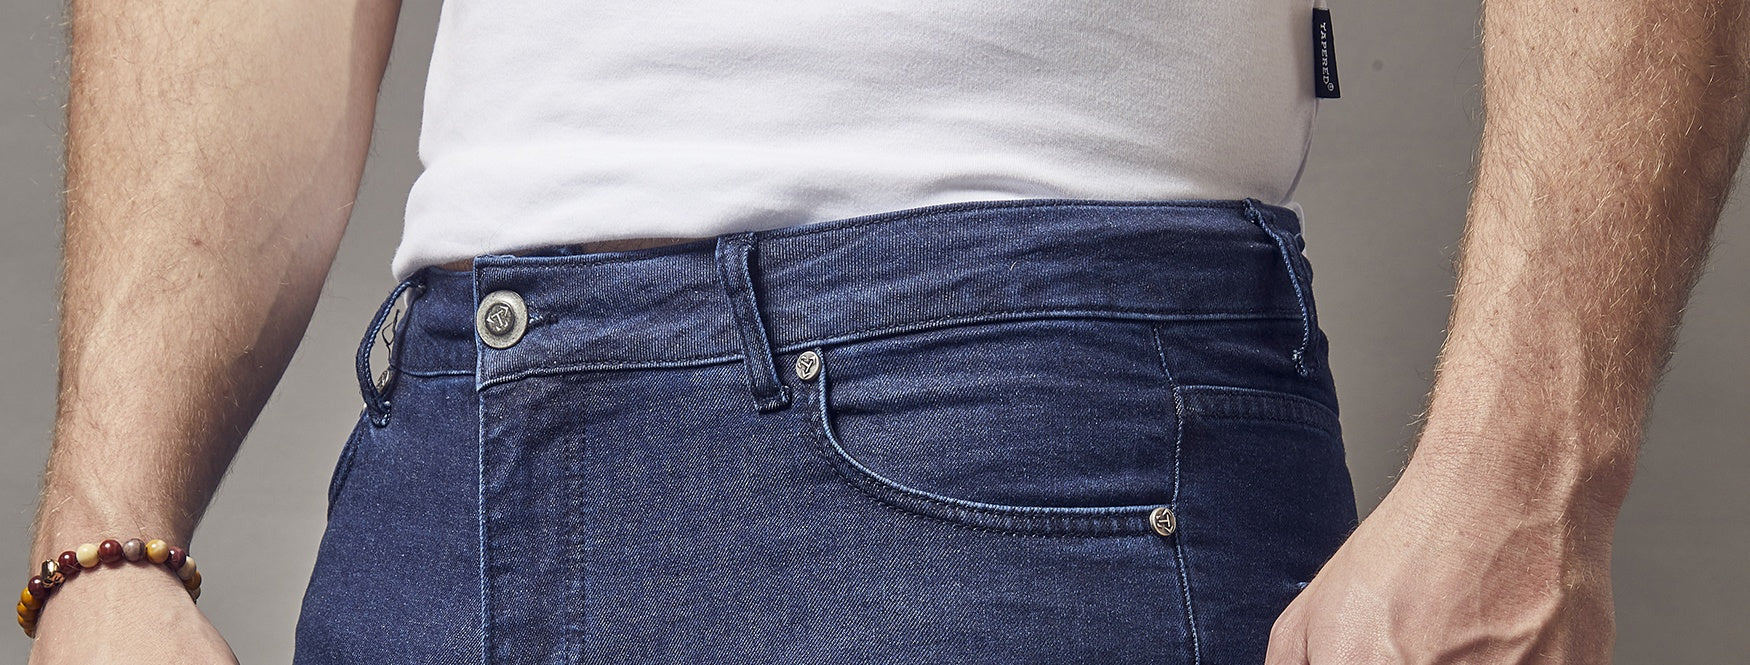 How to Measure Waist for Men's Jeans by Tapered Menswear